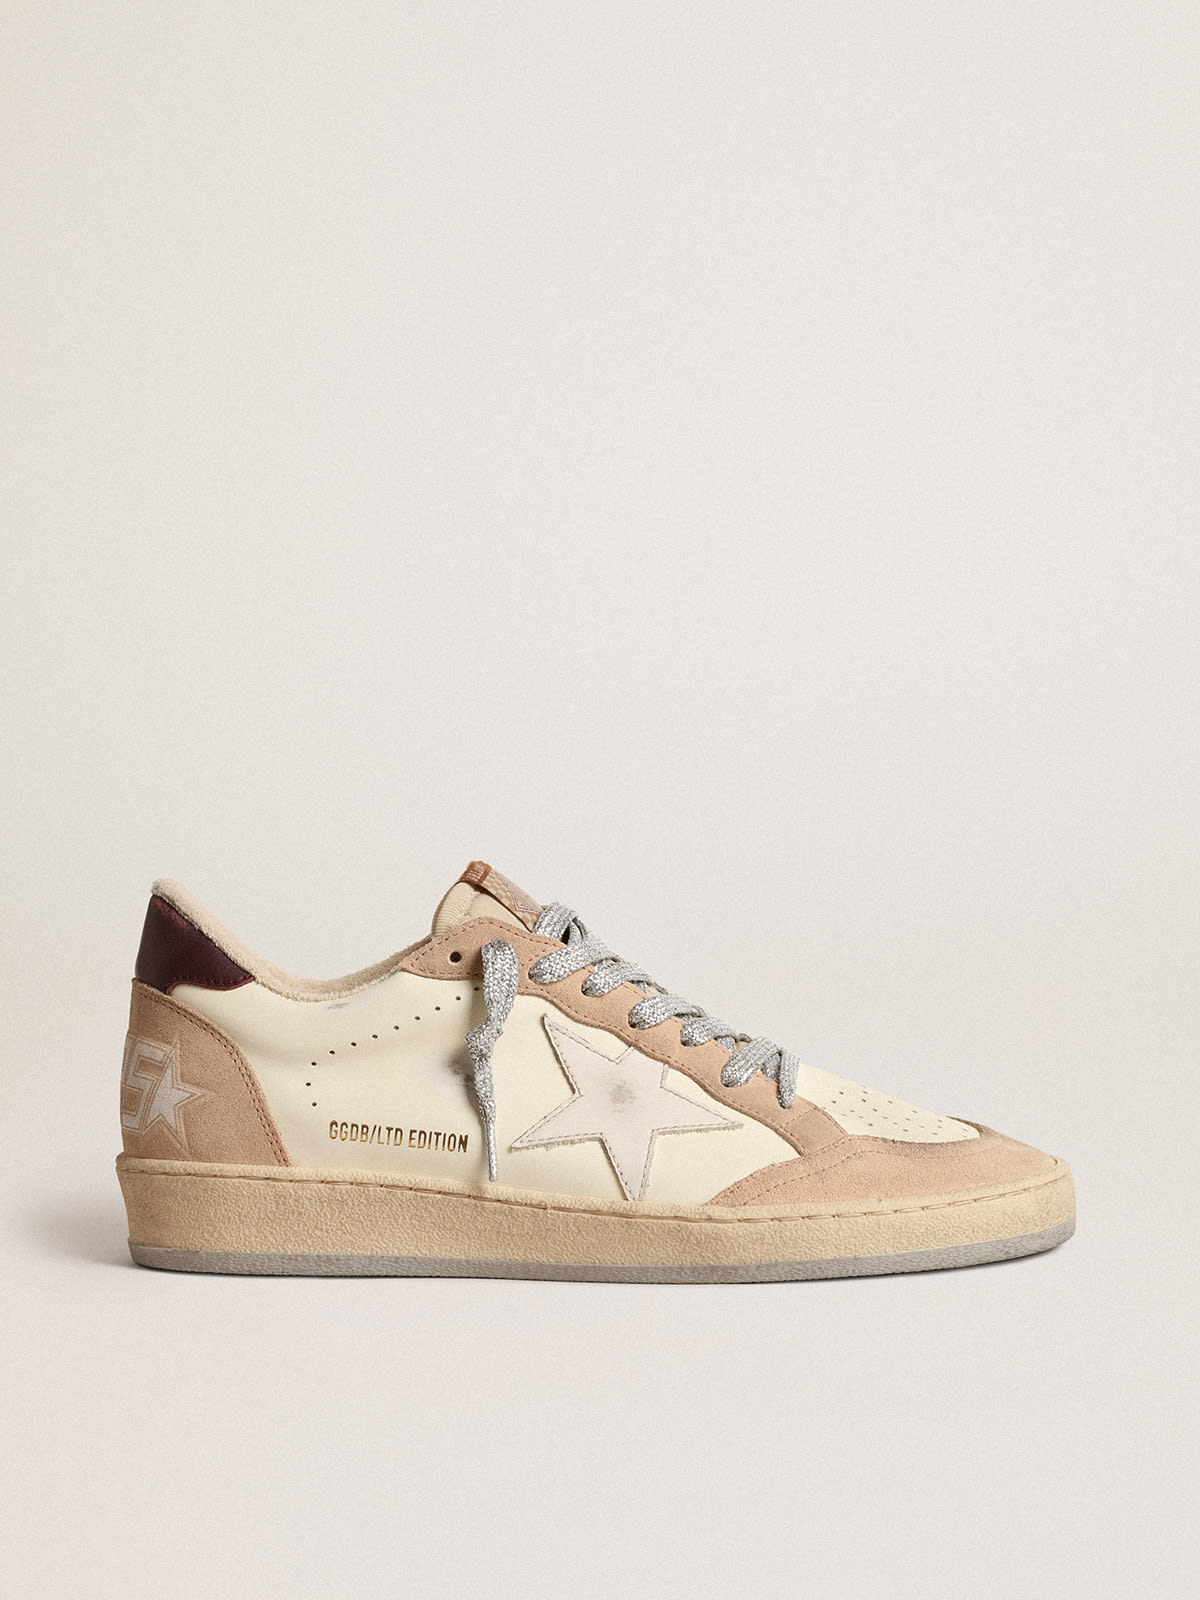 Ball Star LTD with white star and burgundy leather heel tab | Golden Goose